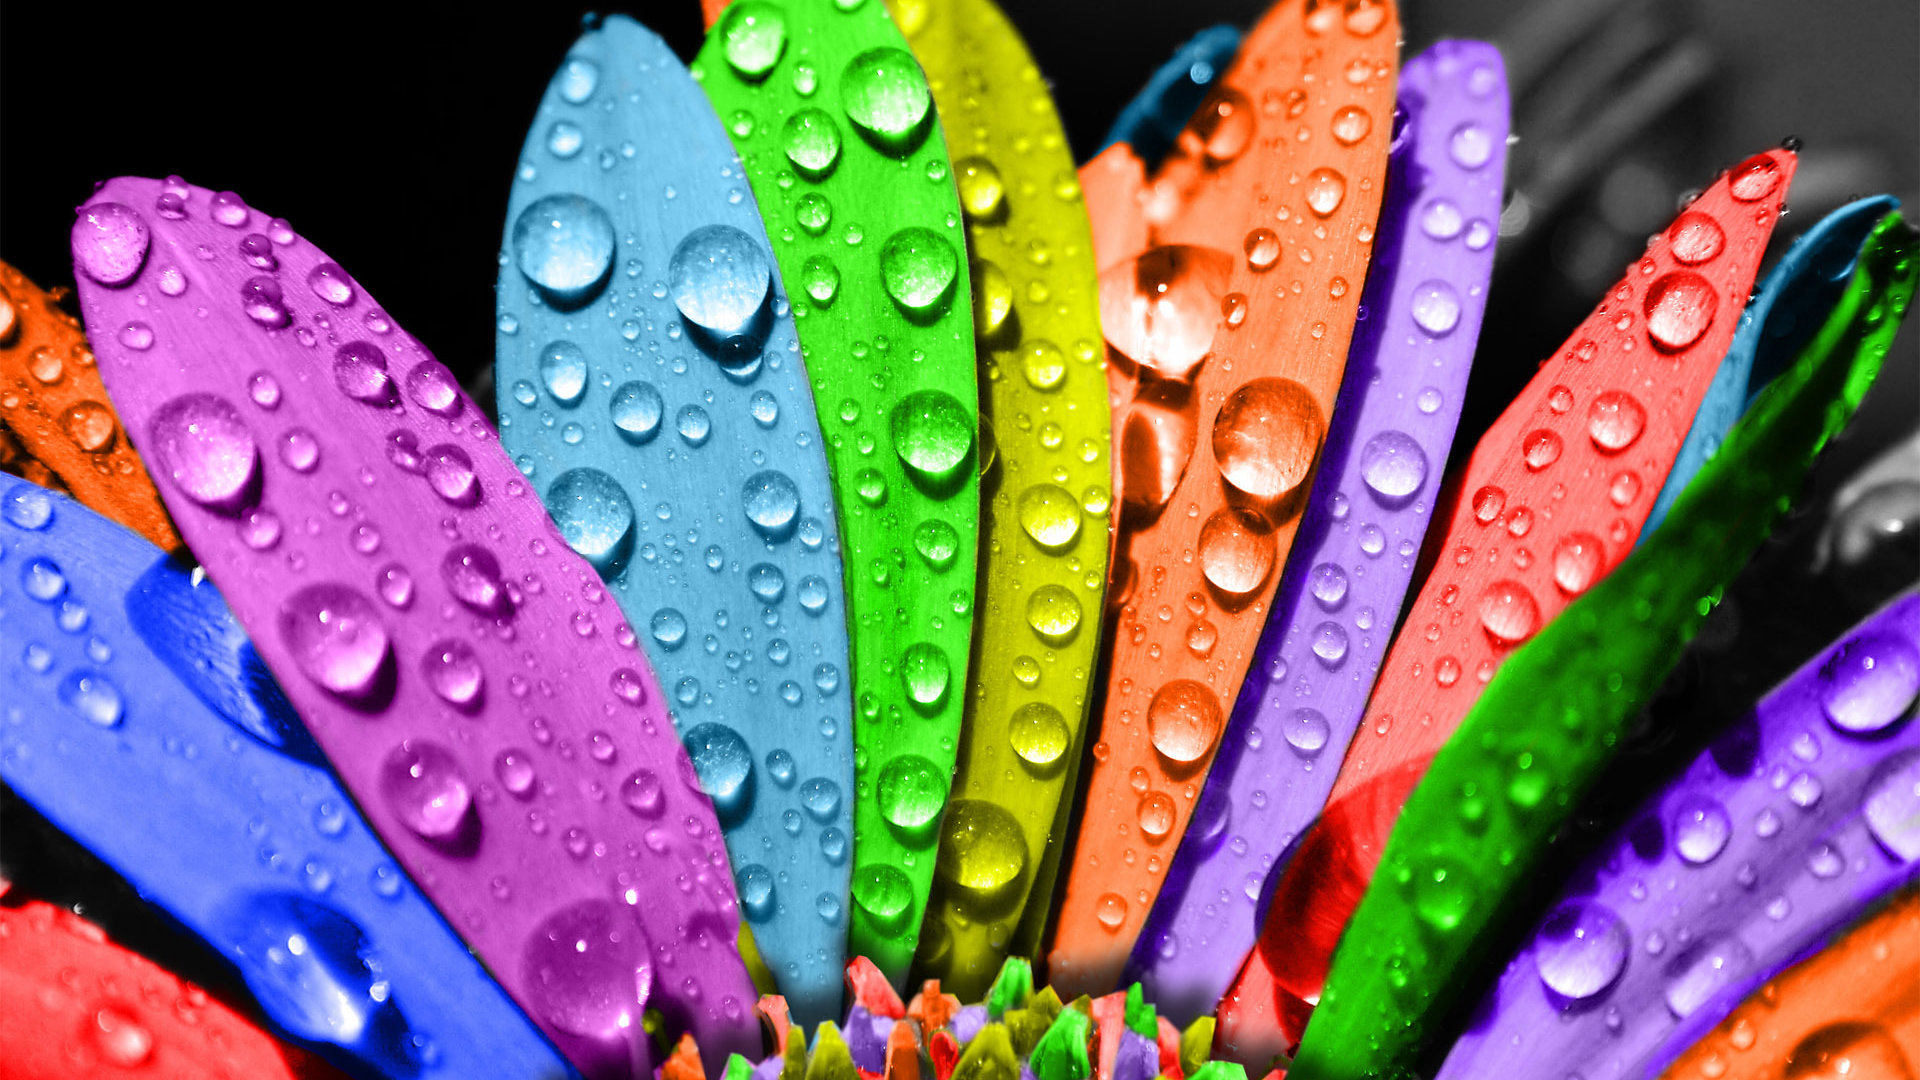 Pride Community Center Of The Tri-cities - Water Drops Flowers - HD Wallpaper 